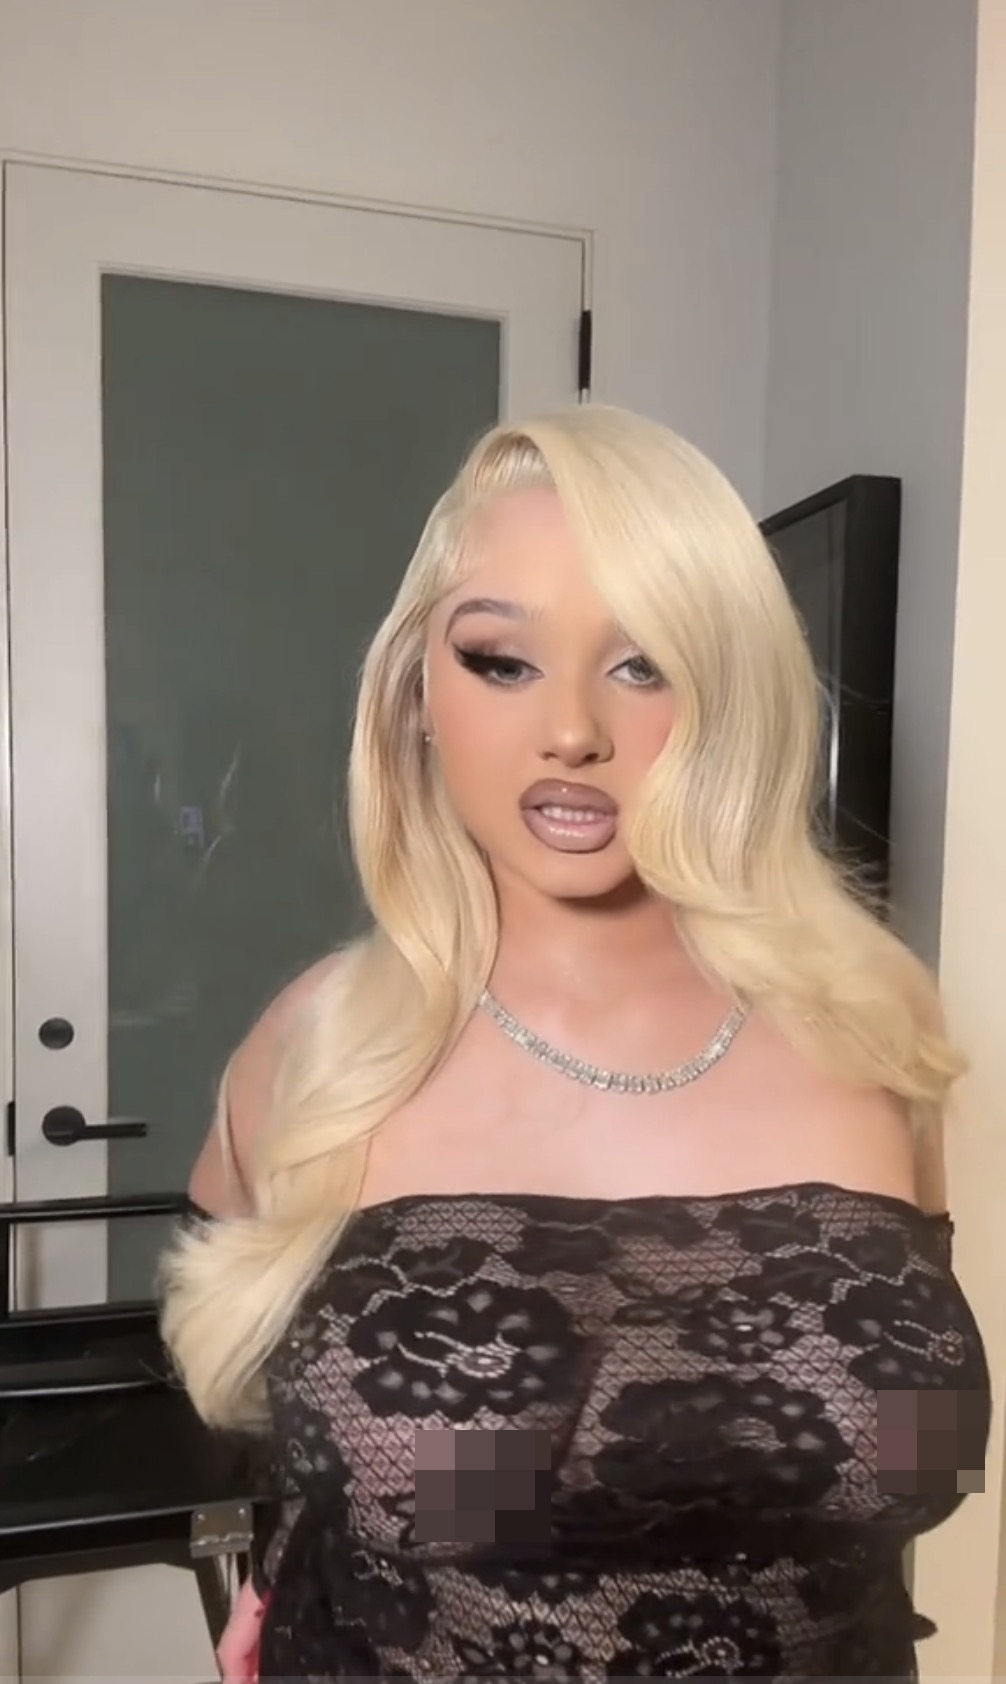 Alabama shared multiple photos and videos in her risque outfit while also admitting she got lip fillers for her birthday